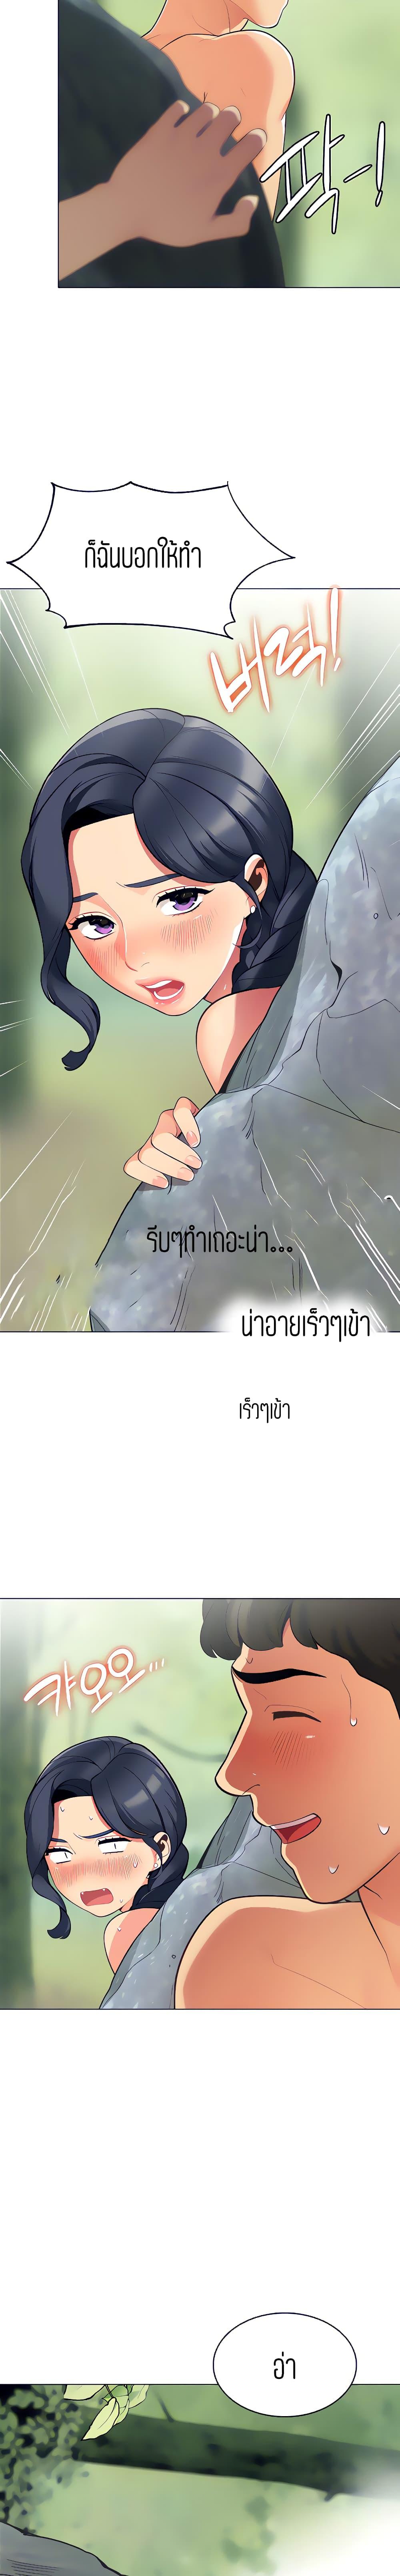 A Good Day to Camp 4 ภาพ 15